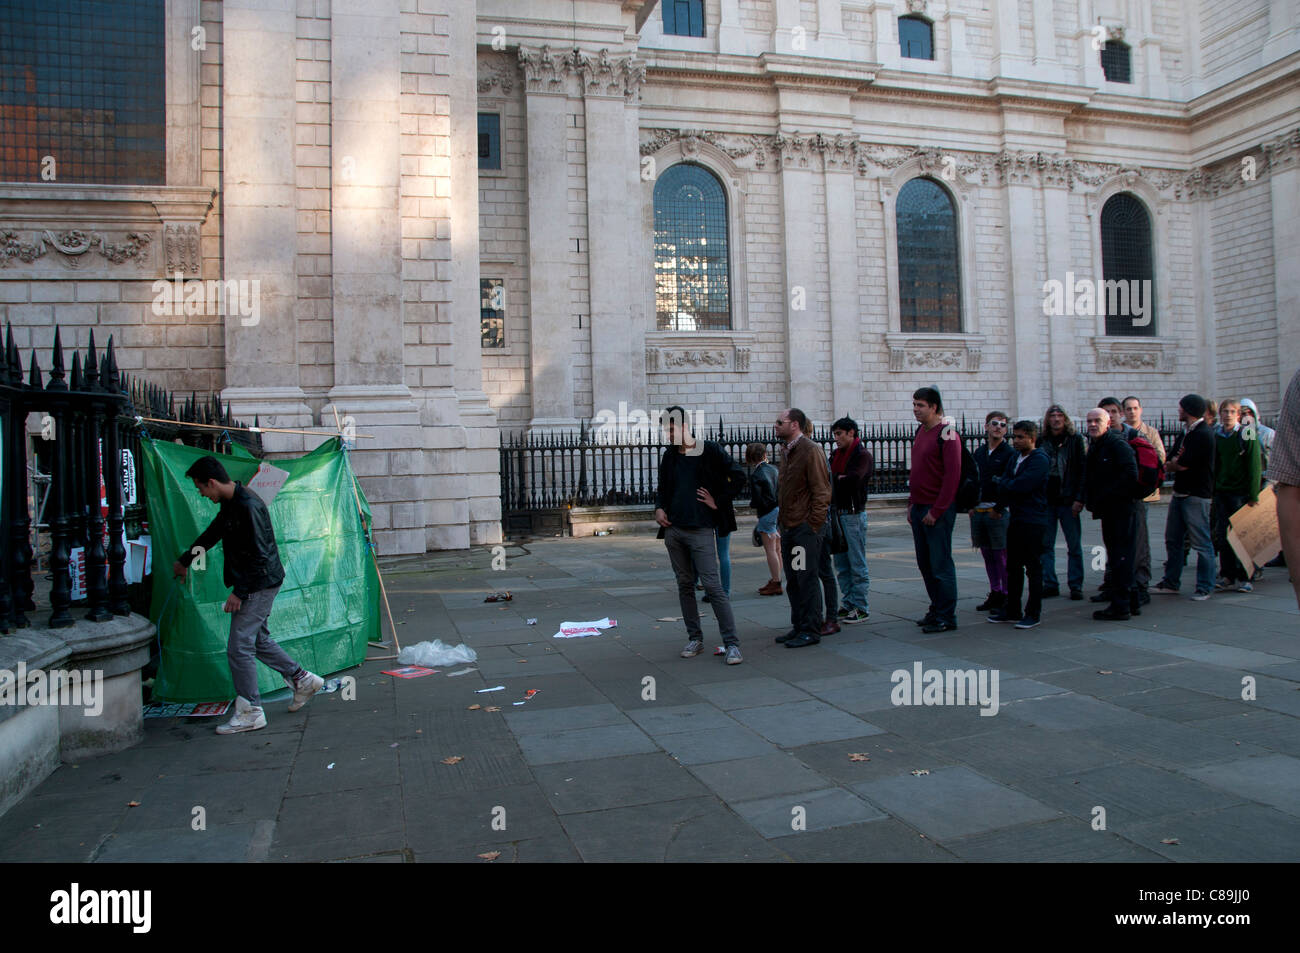 Occupy London. A line of men queue for a make-shift toilet in front of St Paul's cathedral. Stock Photo